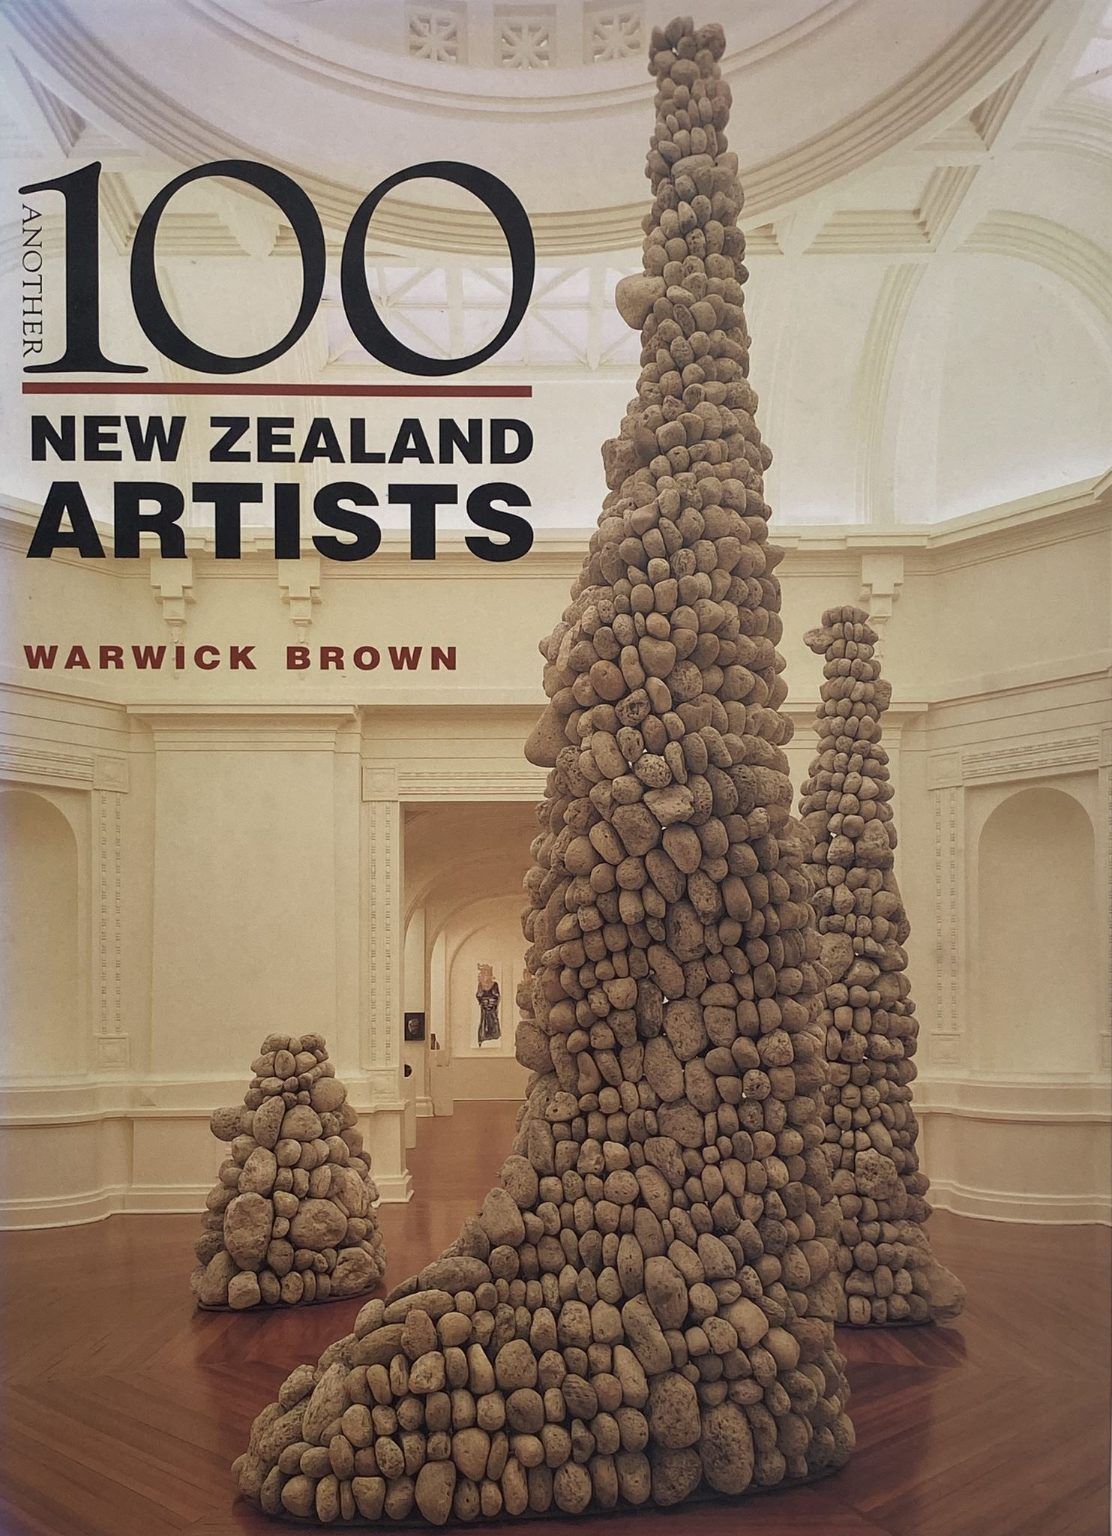 ANOTHER 100 NEW ZEALAND ARTISTS